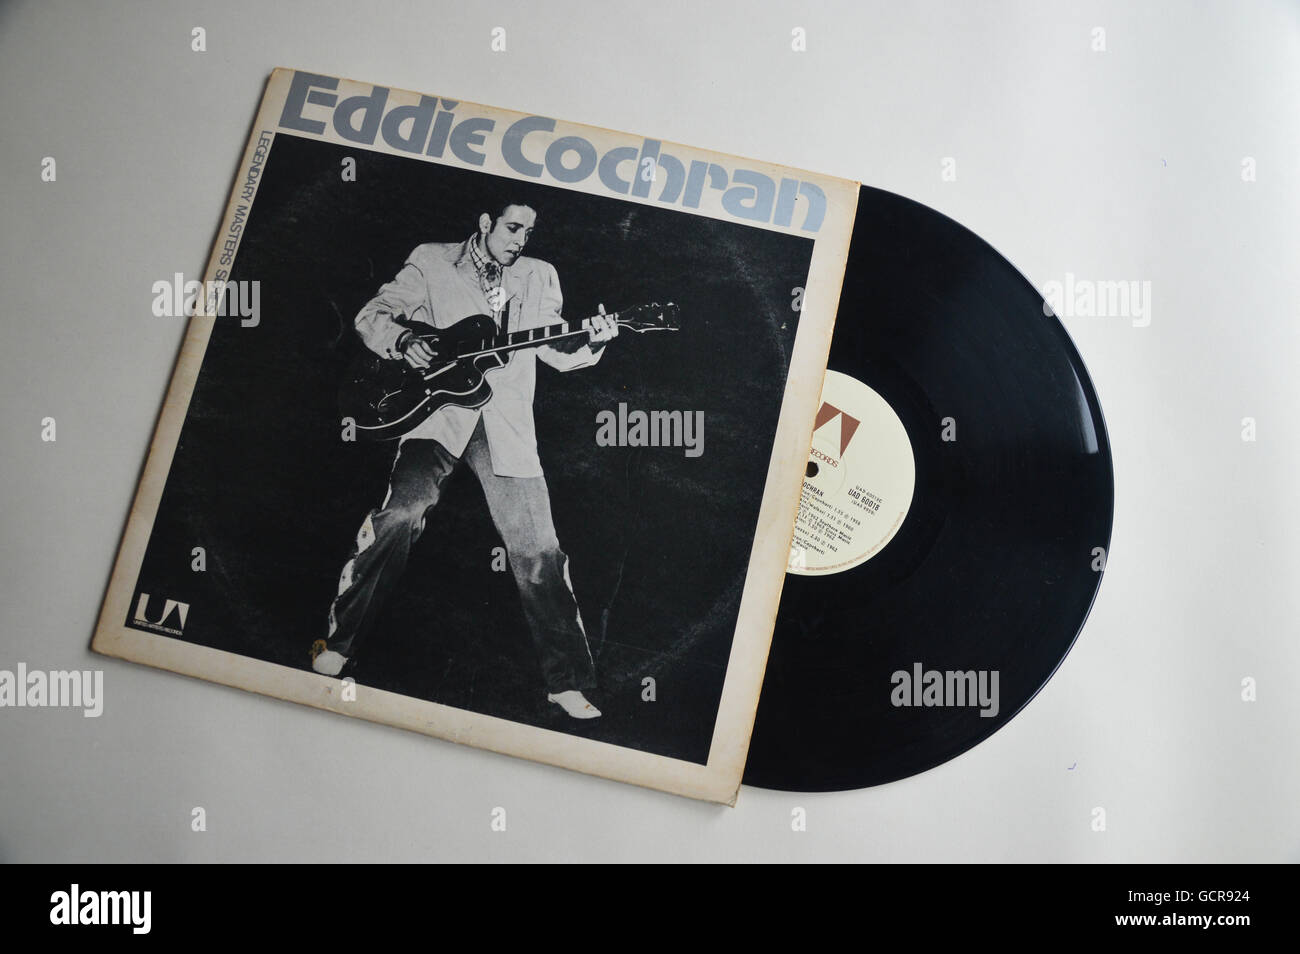 1950's Rock and Roll Star Eddie Cochran's Double Record Album Cover by United Artists Stock Photo